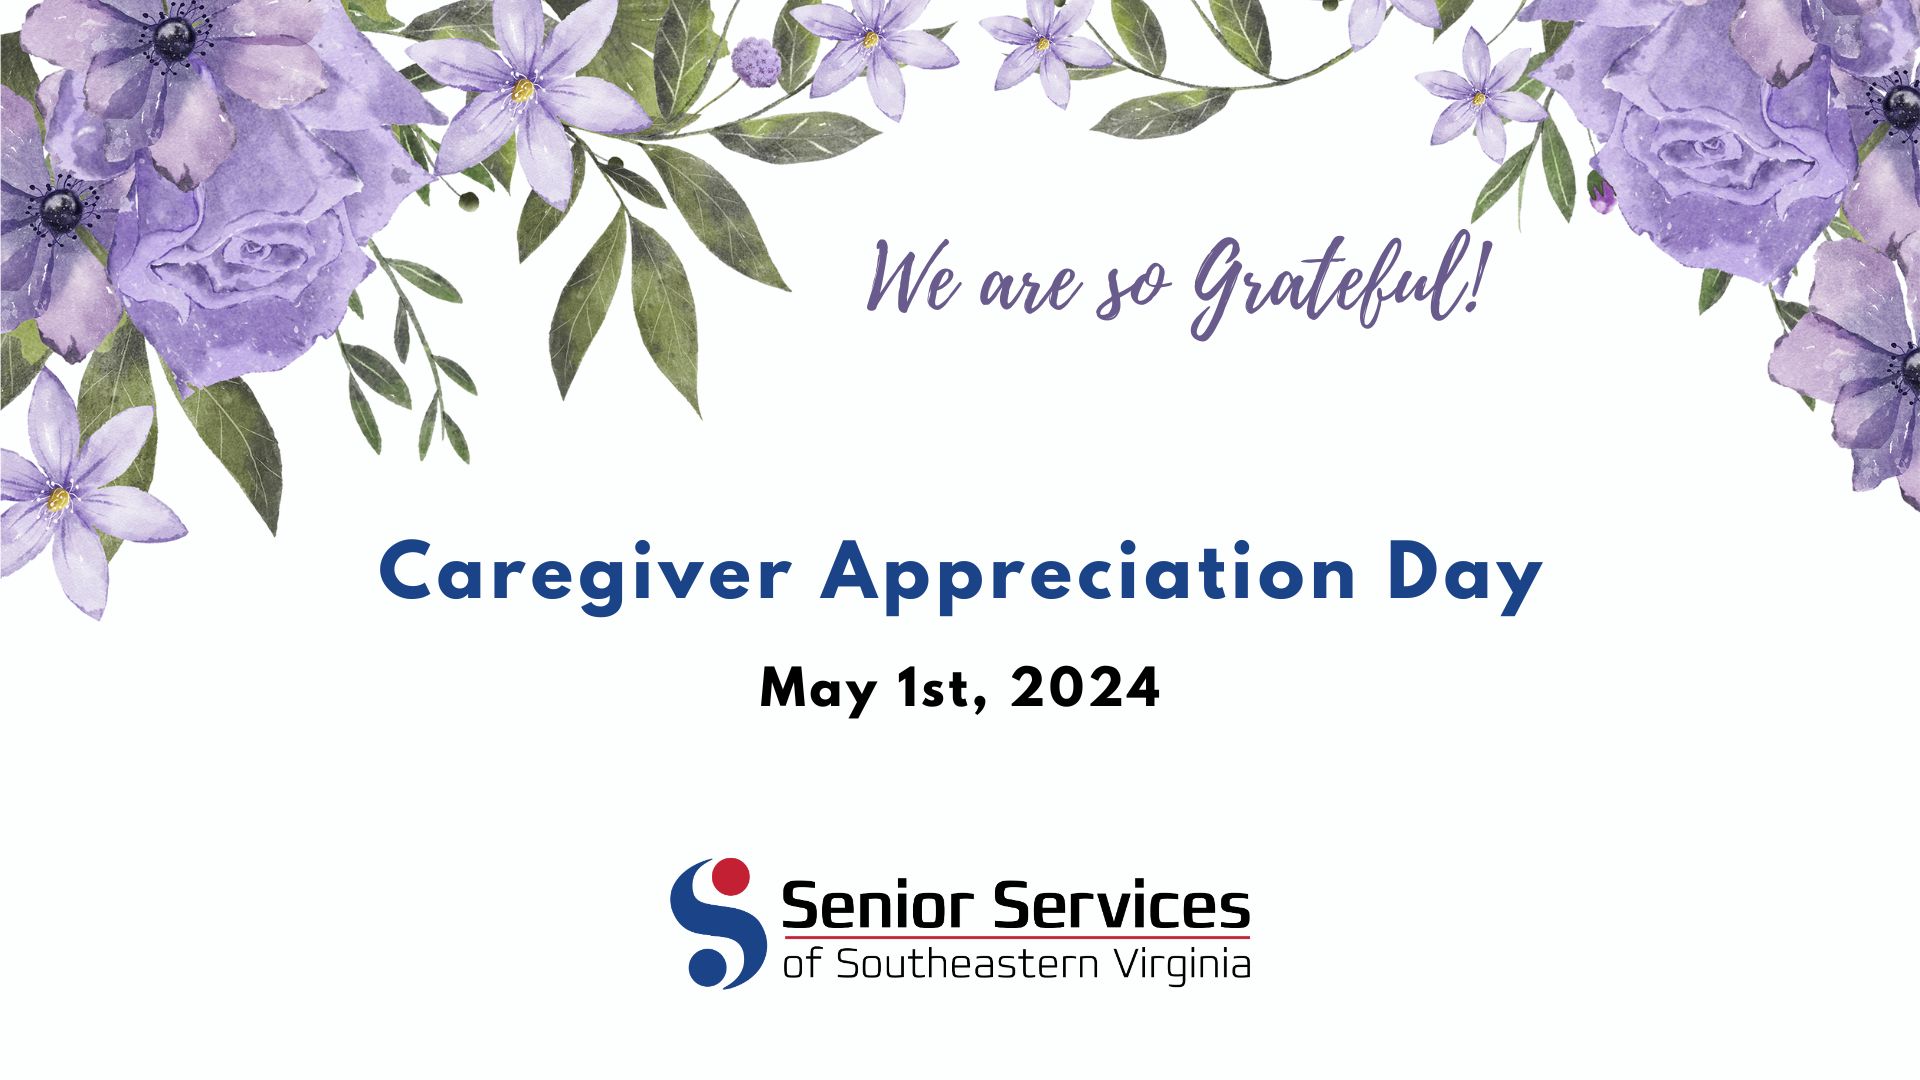 Caregivers Become the Focus of Care at Senior Services Event